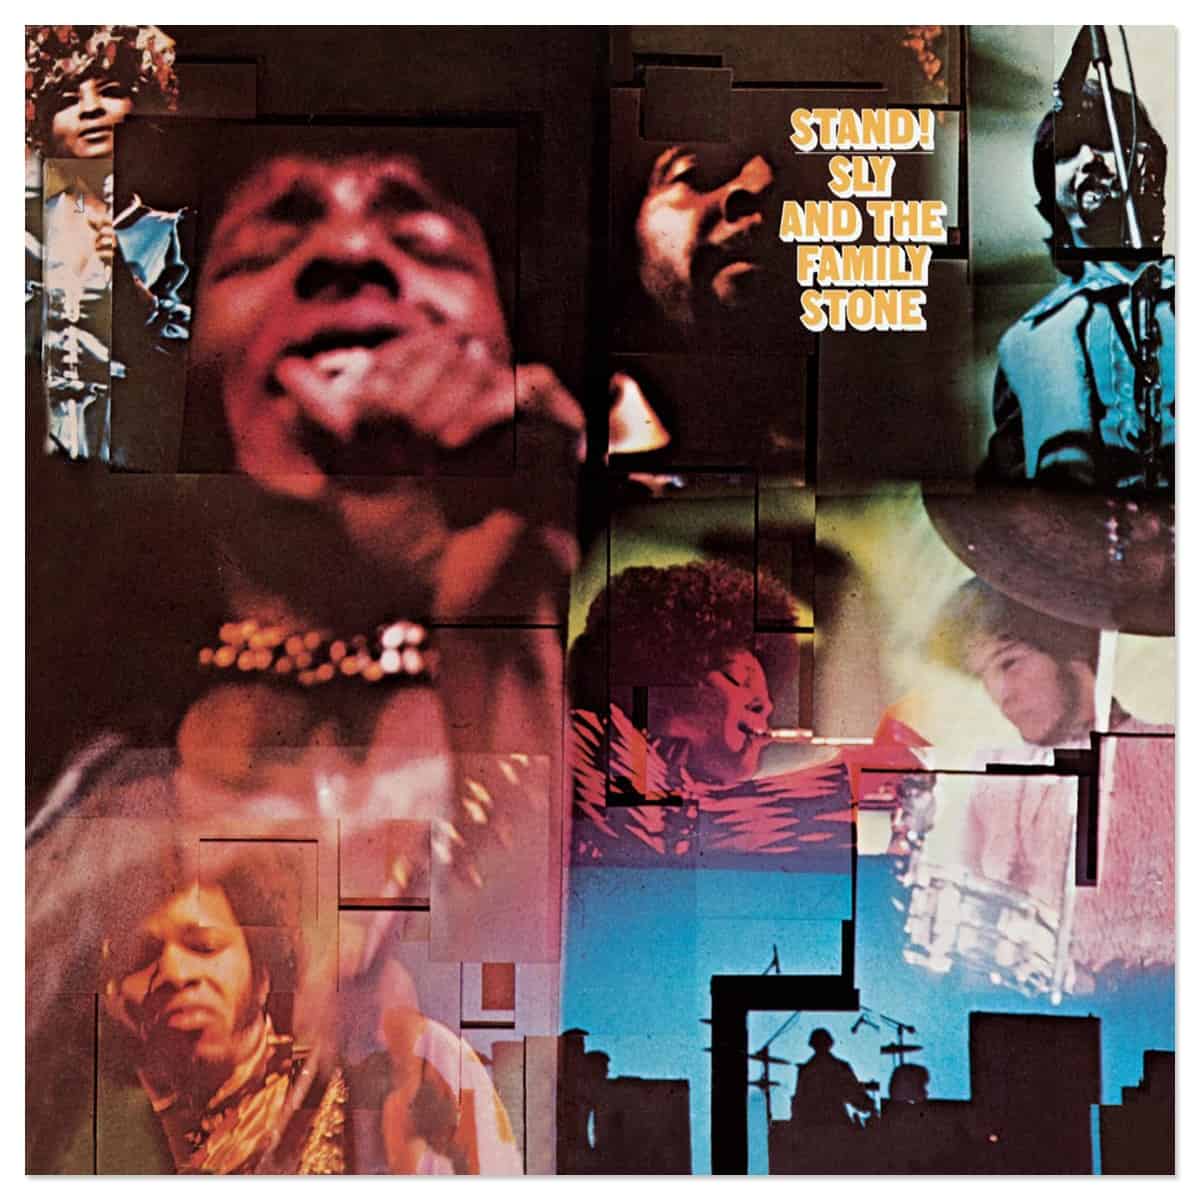 SLY AND THE FAMILY STONE - STAND!